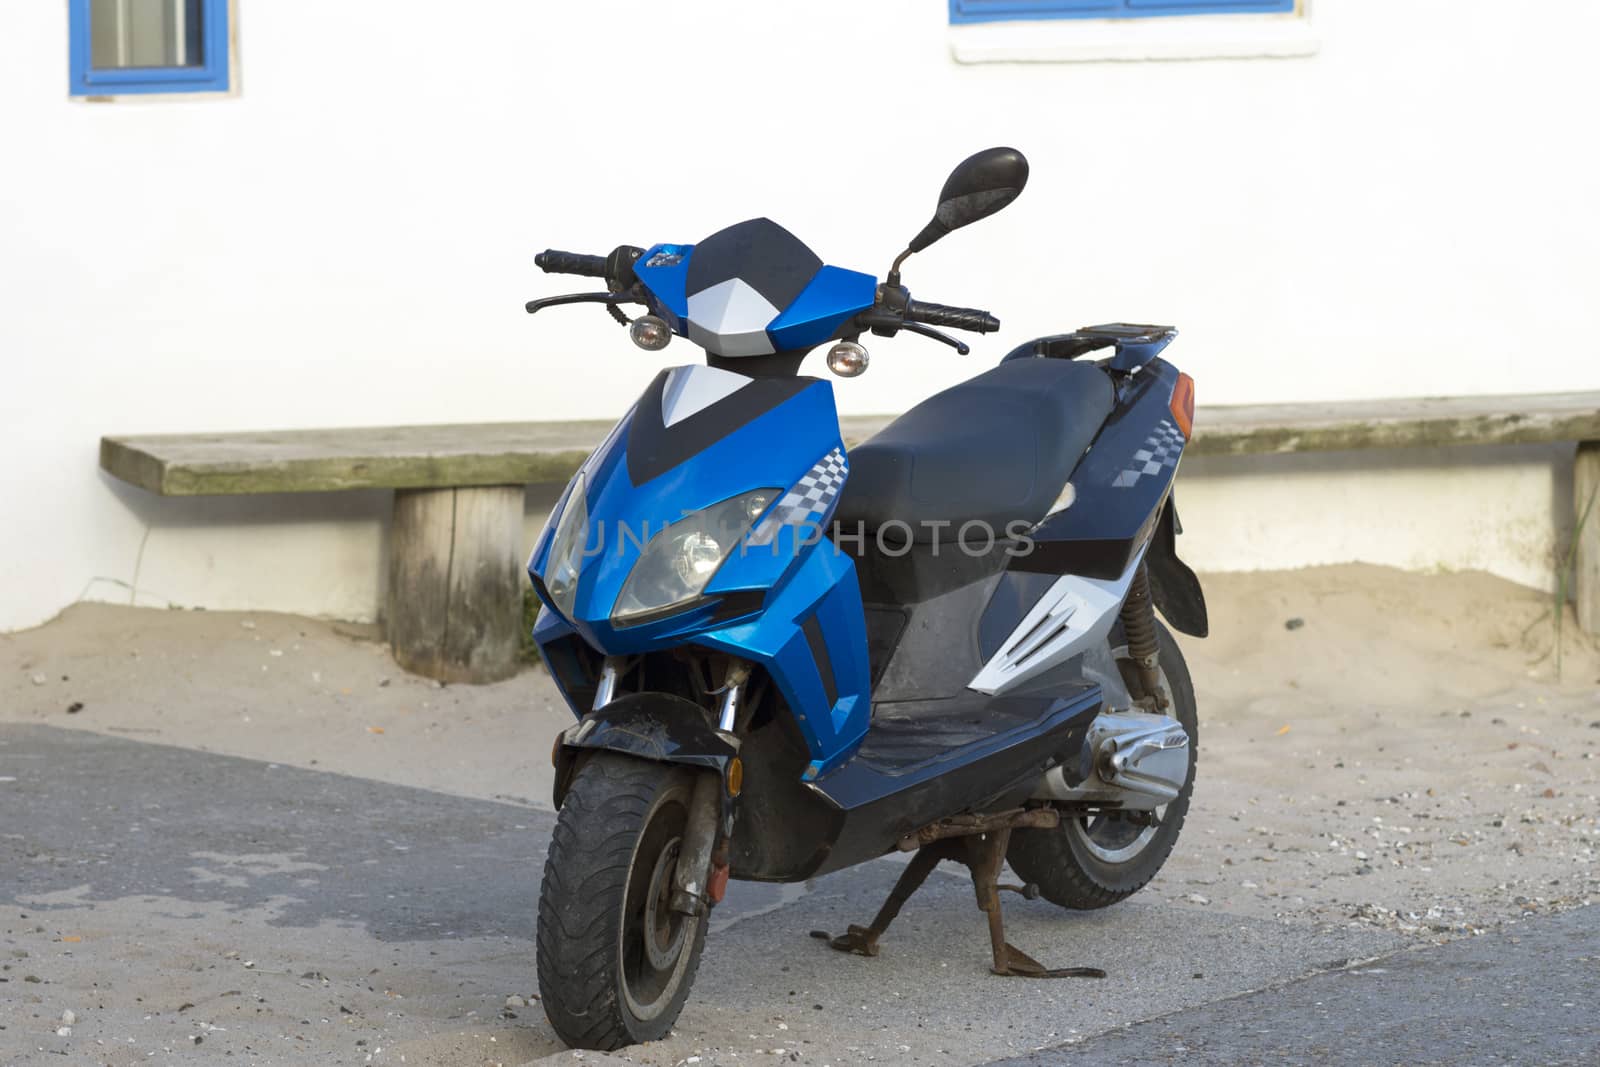 Black and blue scooter parked outdoors in denmark